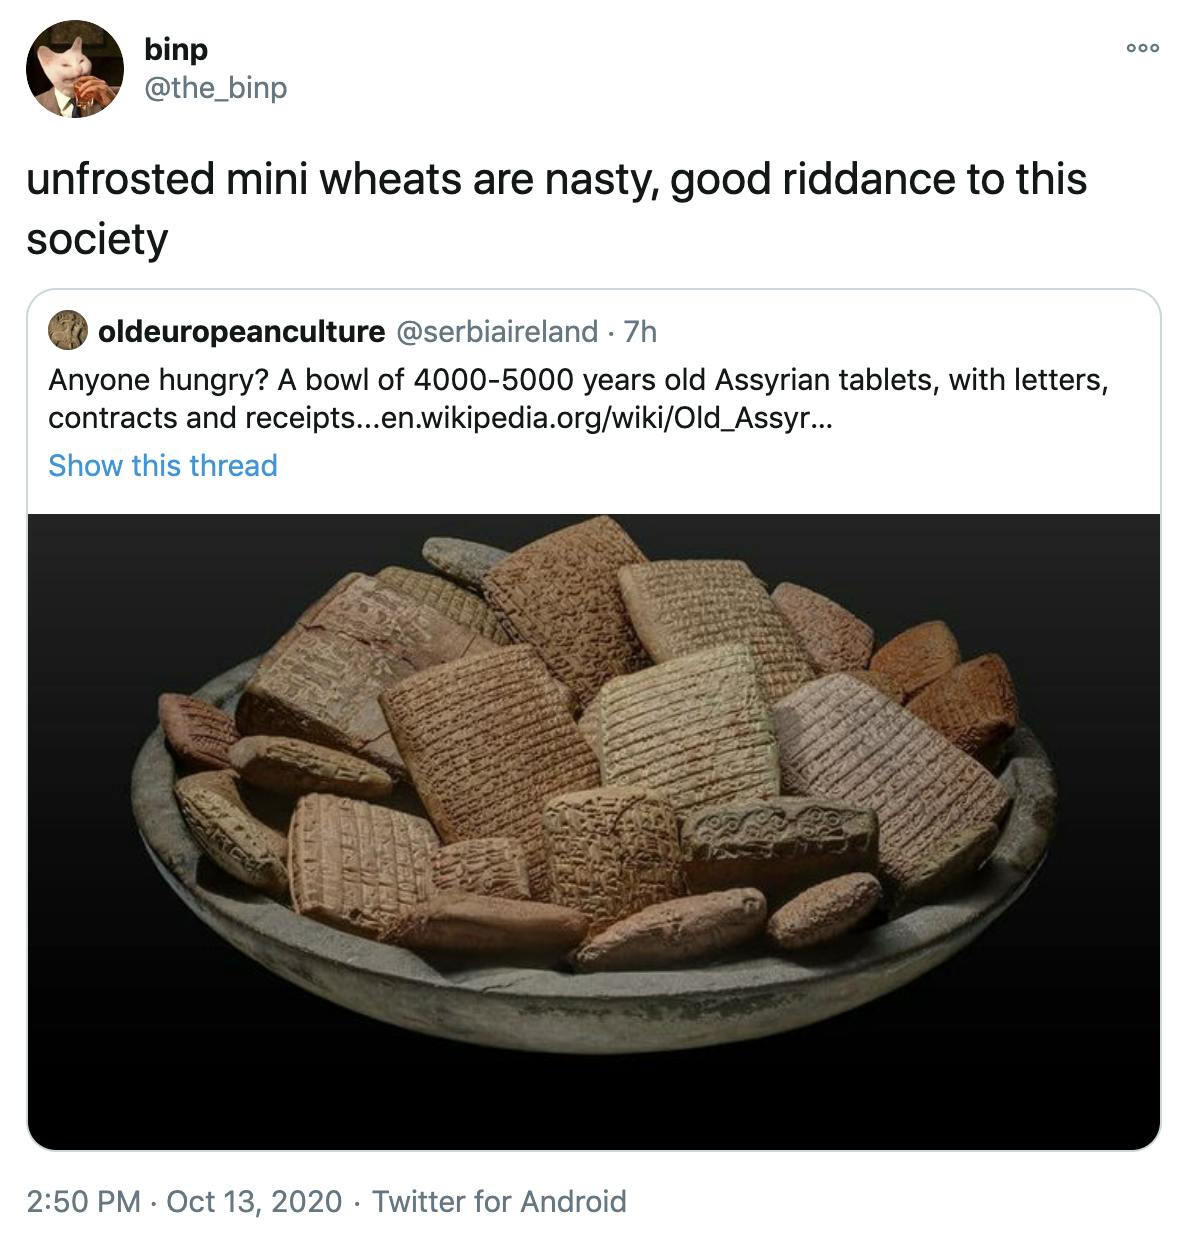 'unfrosted mini wheats are nasty, good riddance to this society' original tweet embedded